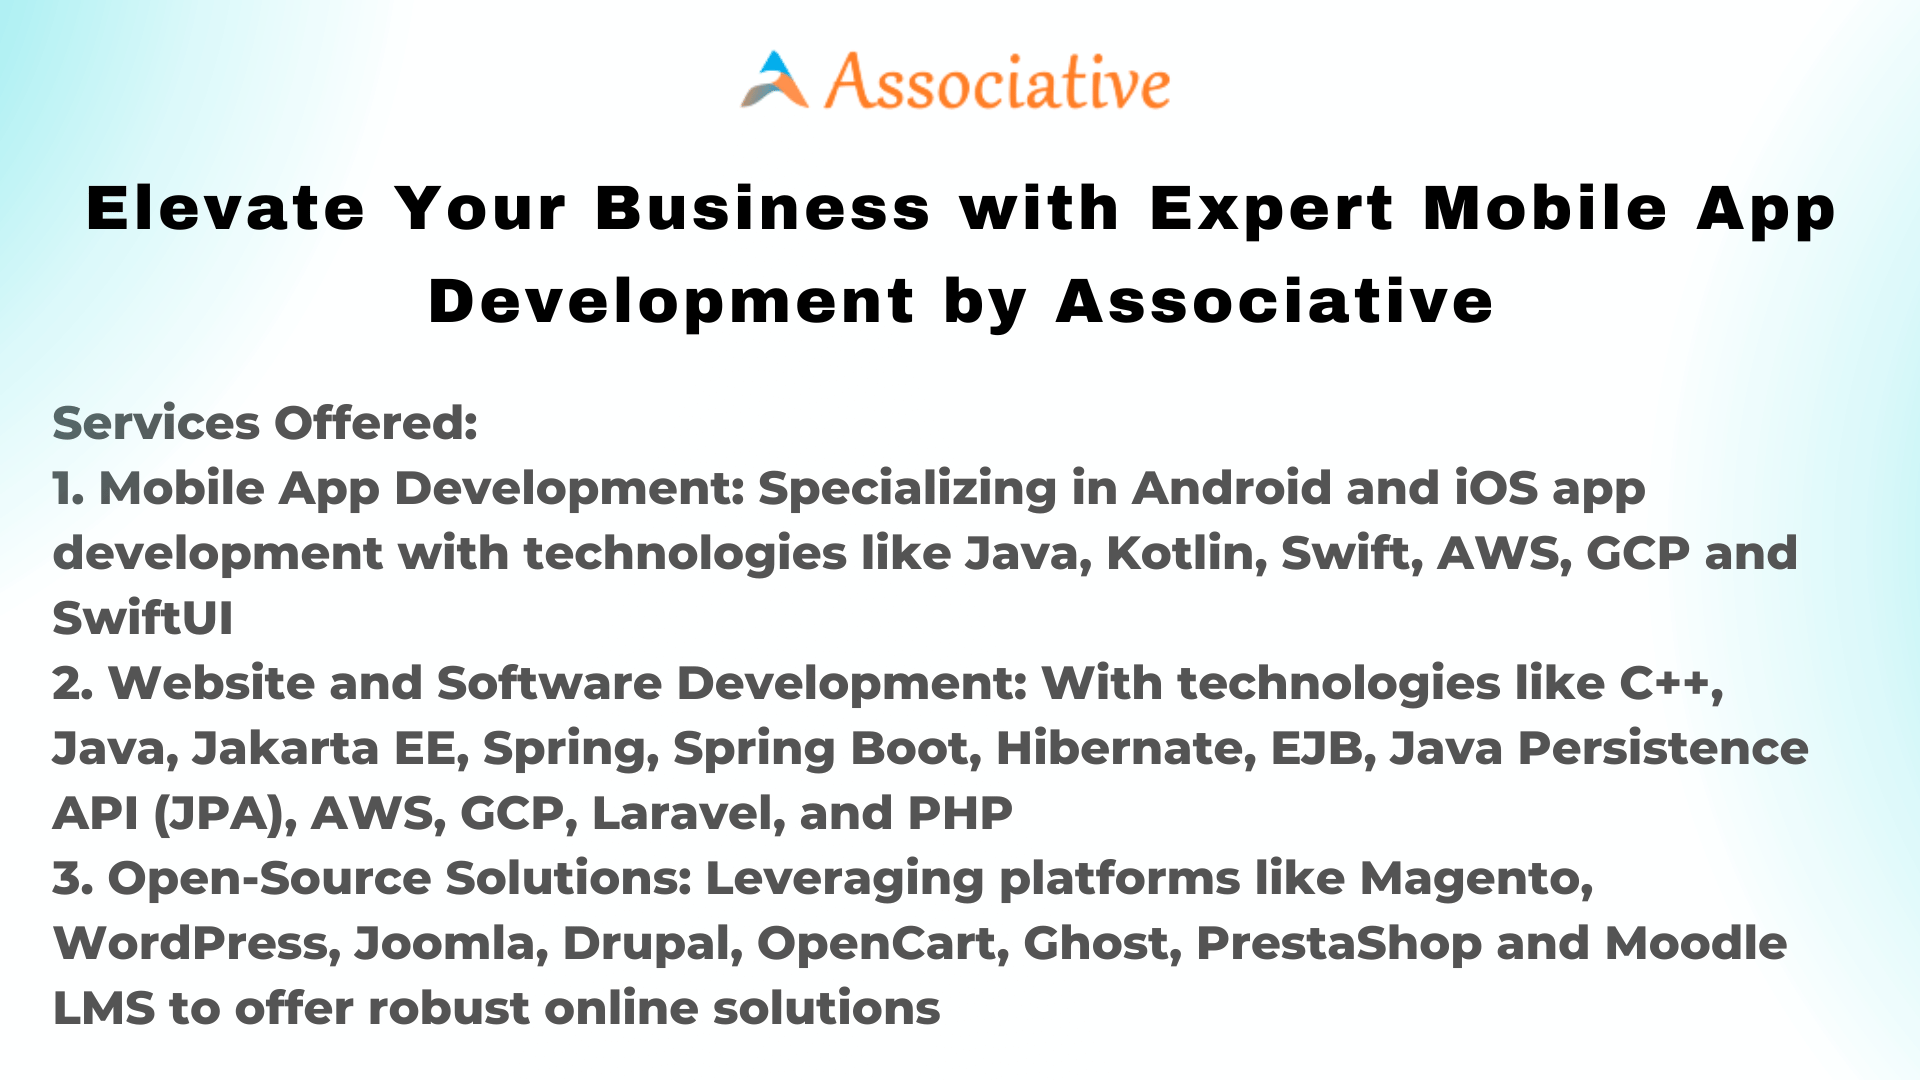 Elevate Your Business with Expert Mobile App Development by Associative